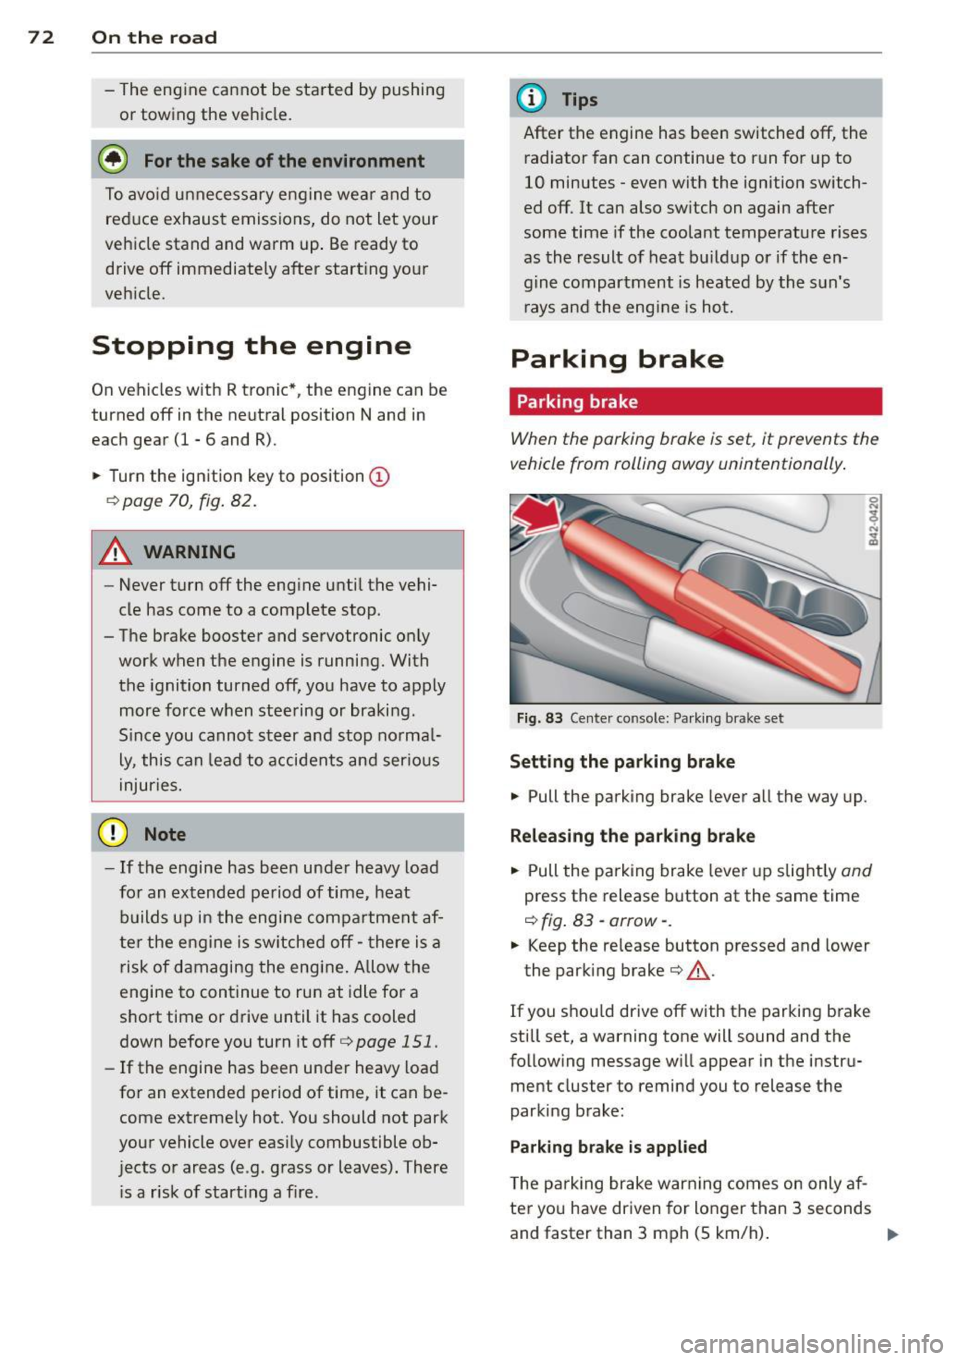 AUDI R8 SPYDER 2012  Owners Manual 7 2  On  the road 
-The eng ine cann ot be started  by pushing 
or  towing  the  vehicle. 
@ For the  sake of the  env ironment 
To avo id  unnecessary engine  wea r and to 
red uce exhaust  emissions